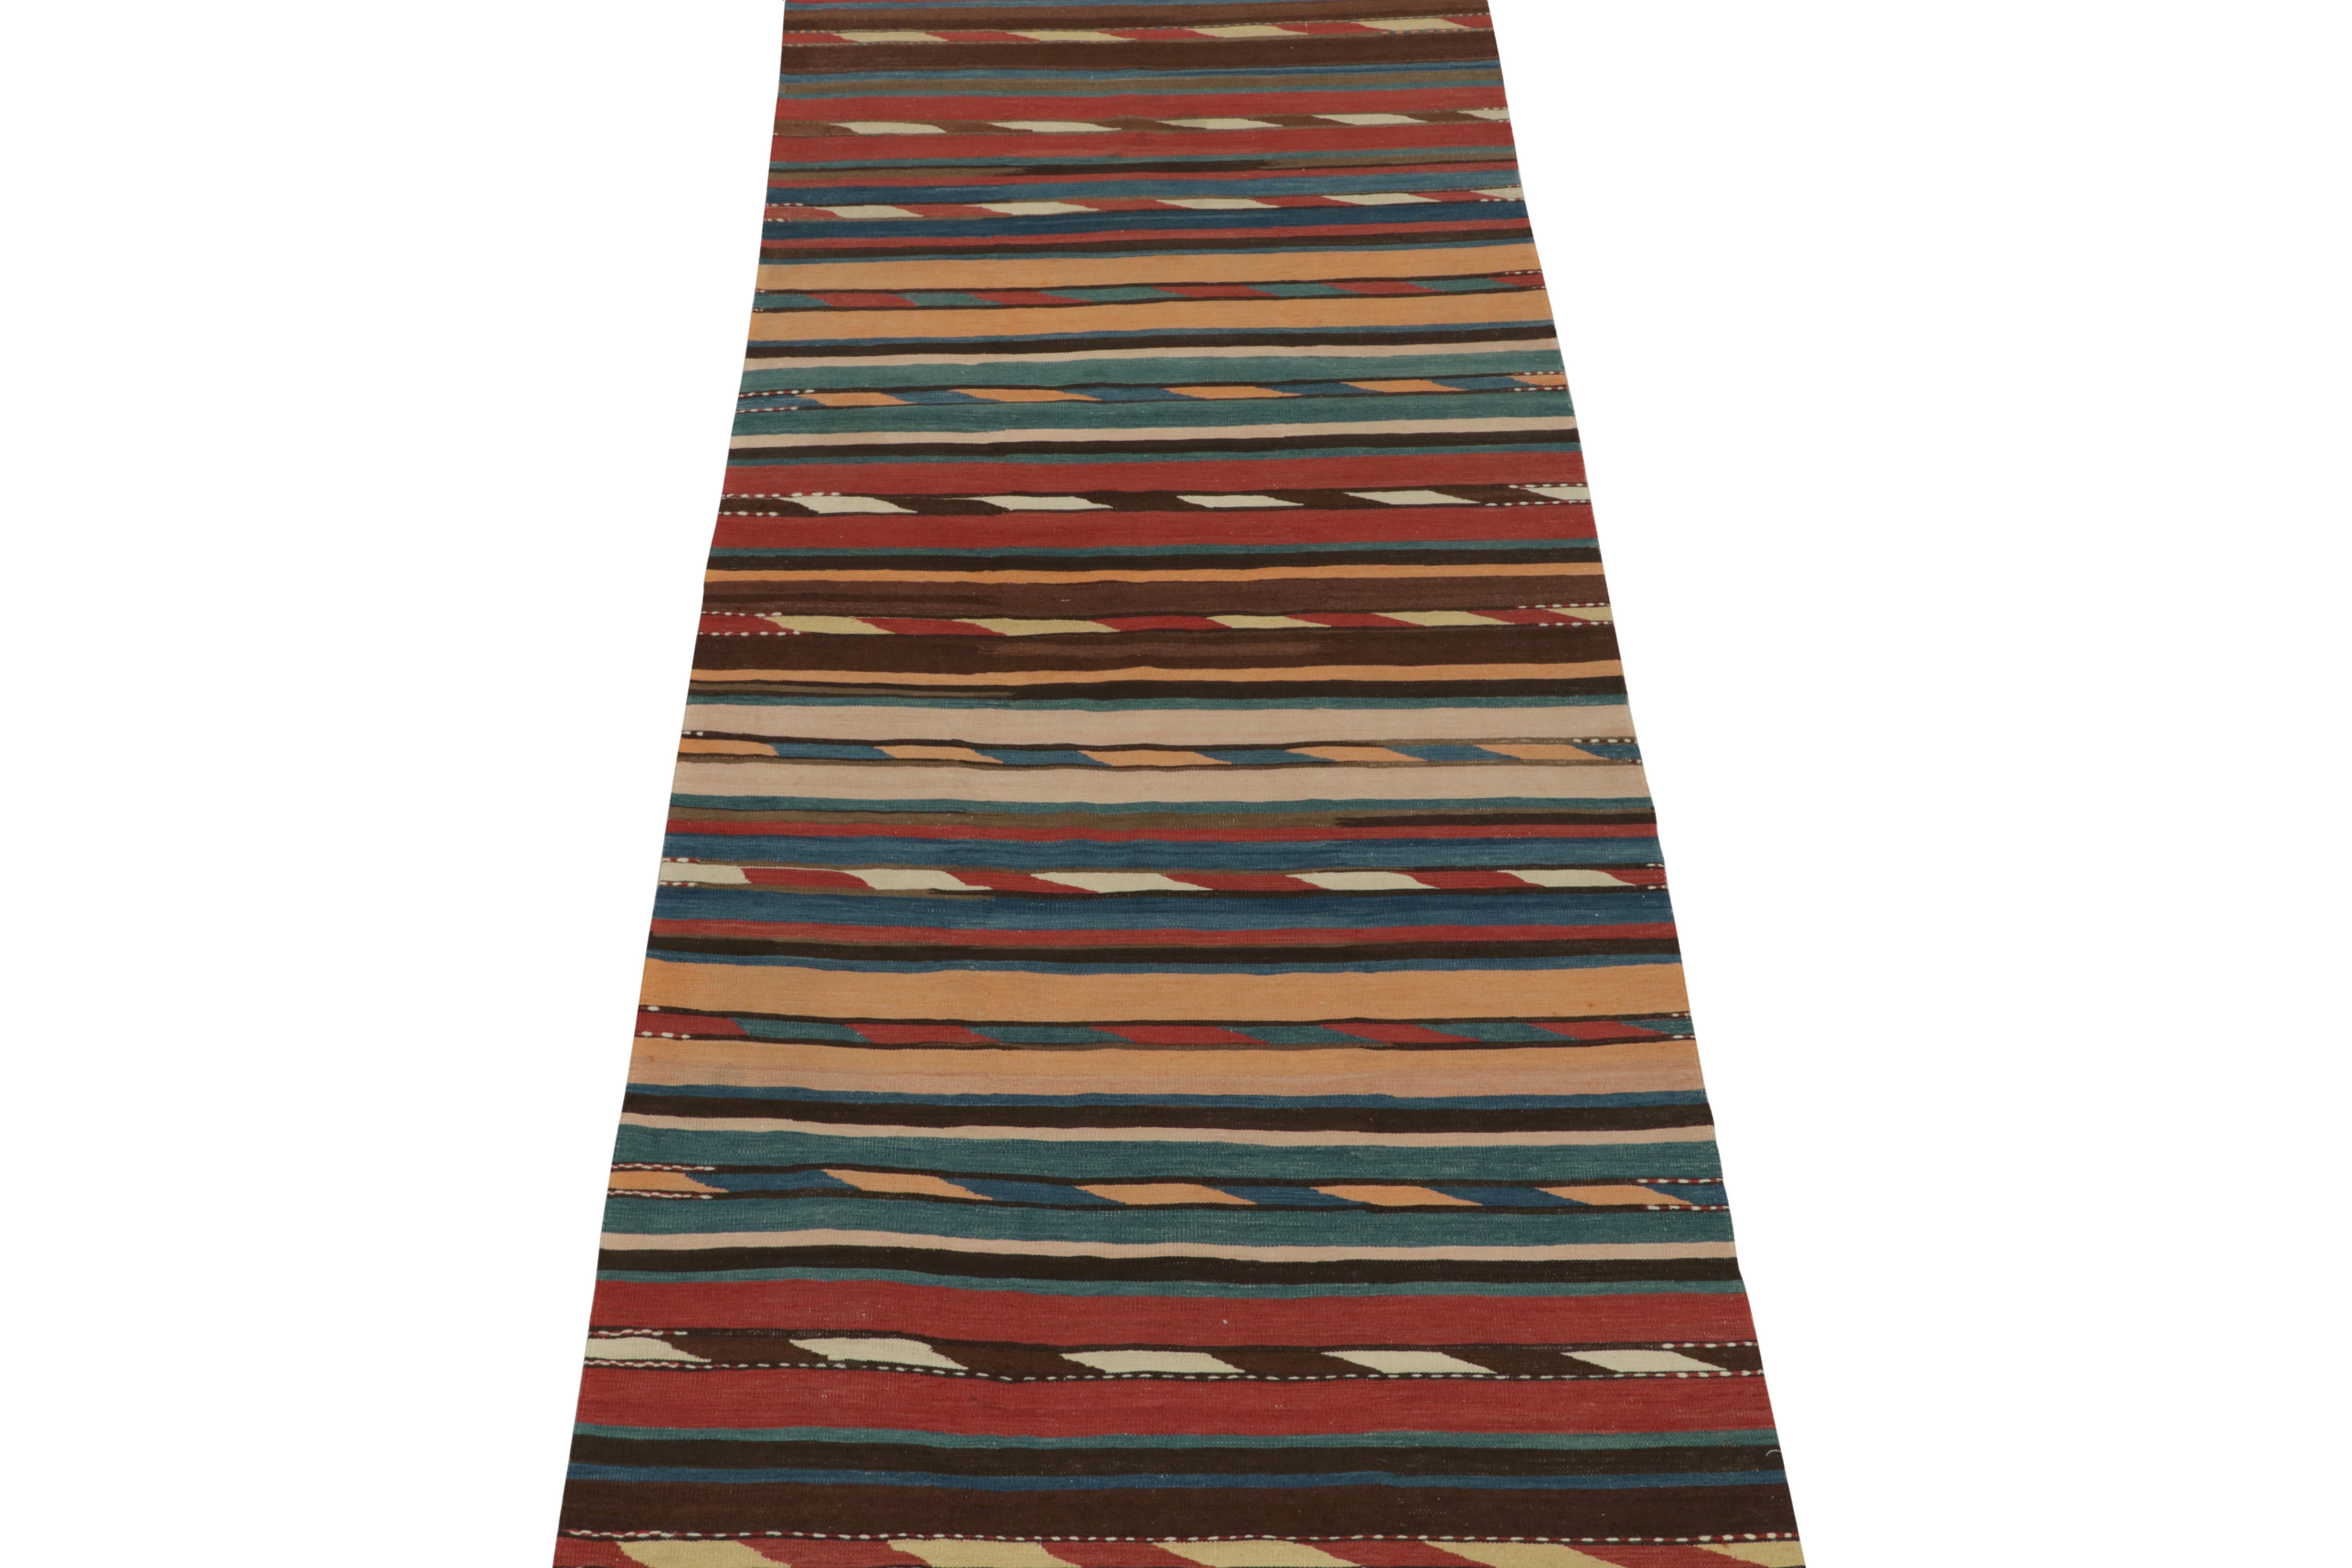 This vintage 4x10 Persian kilim is a unique tribal rug for its period and provenance. Handwoven in wool, it’s believed to be of Shahsavan provenance and originates circa 1950-1960.

Further on the Design:

The field hosts horizontal stripes